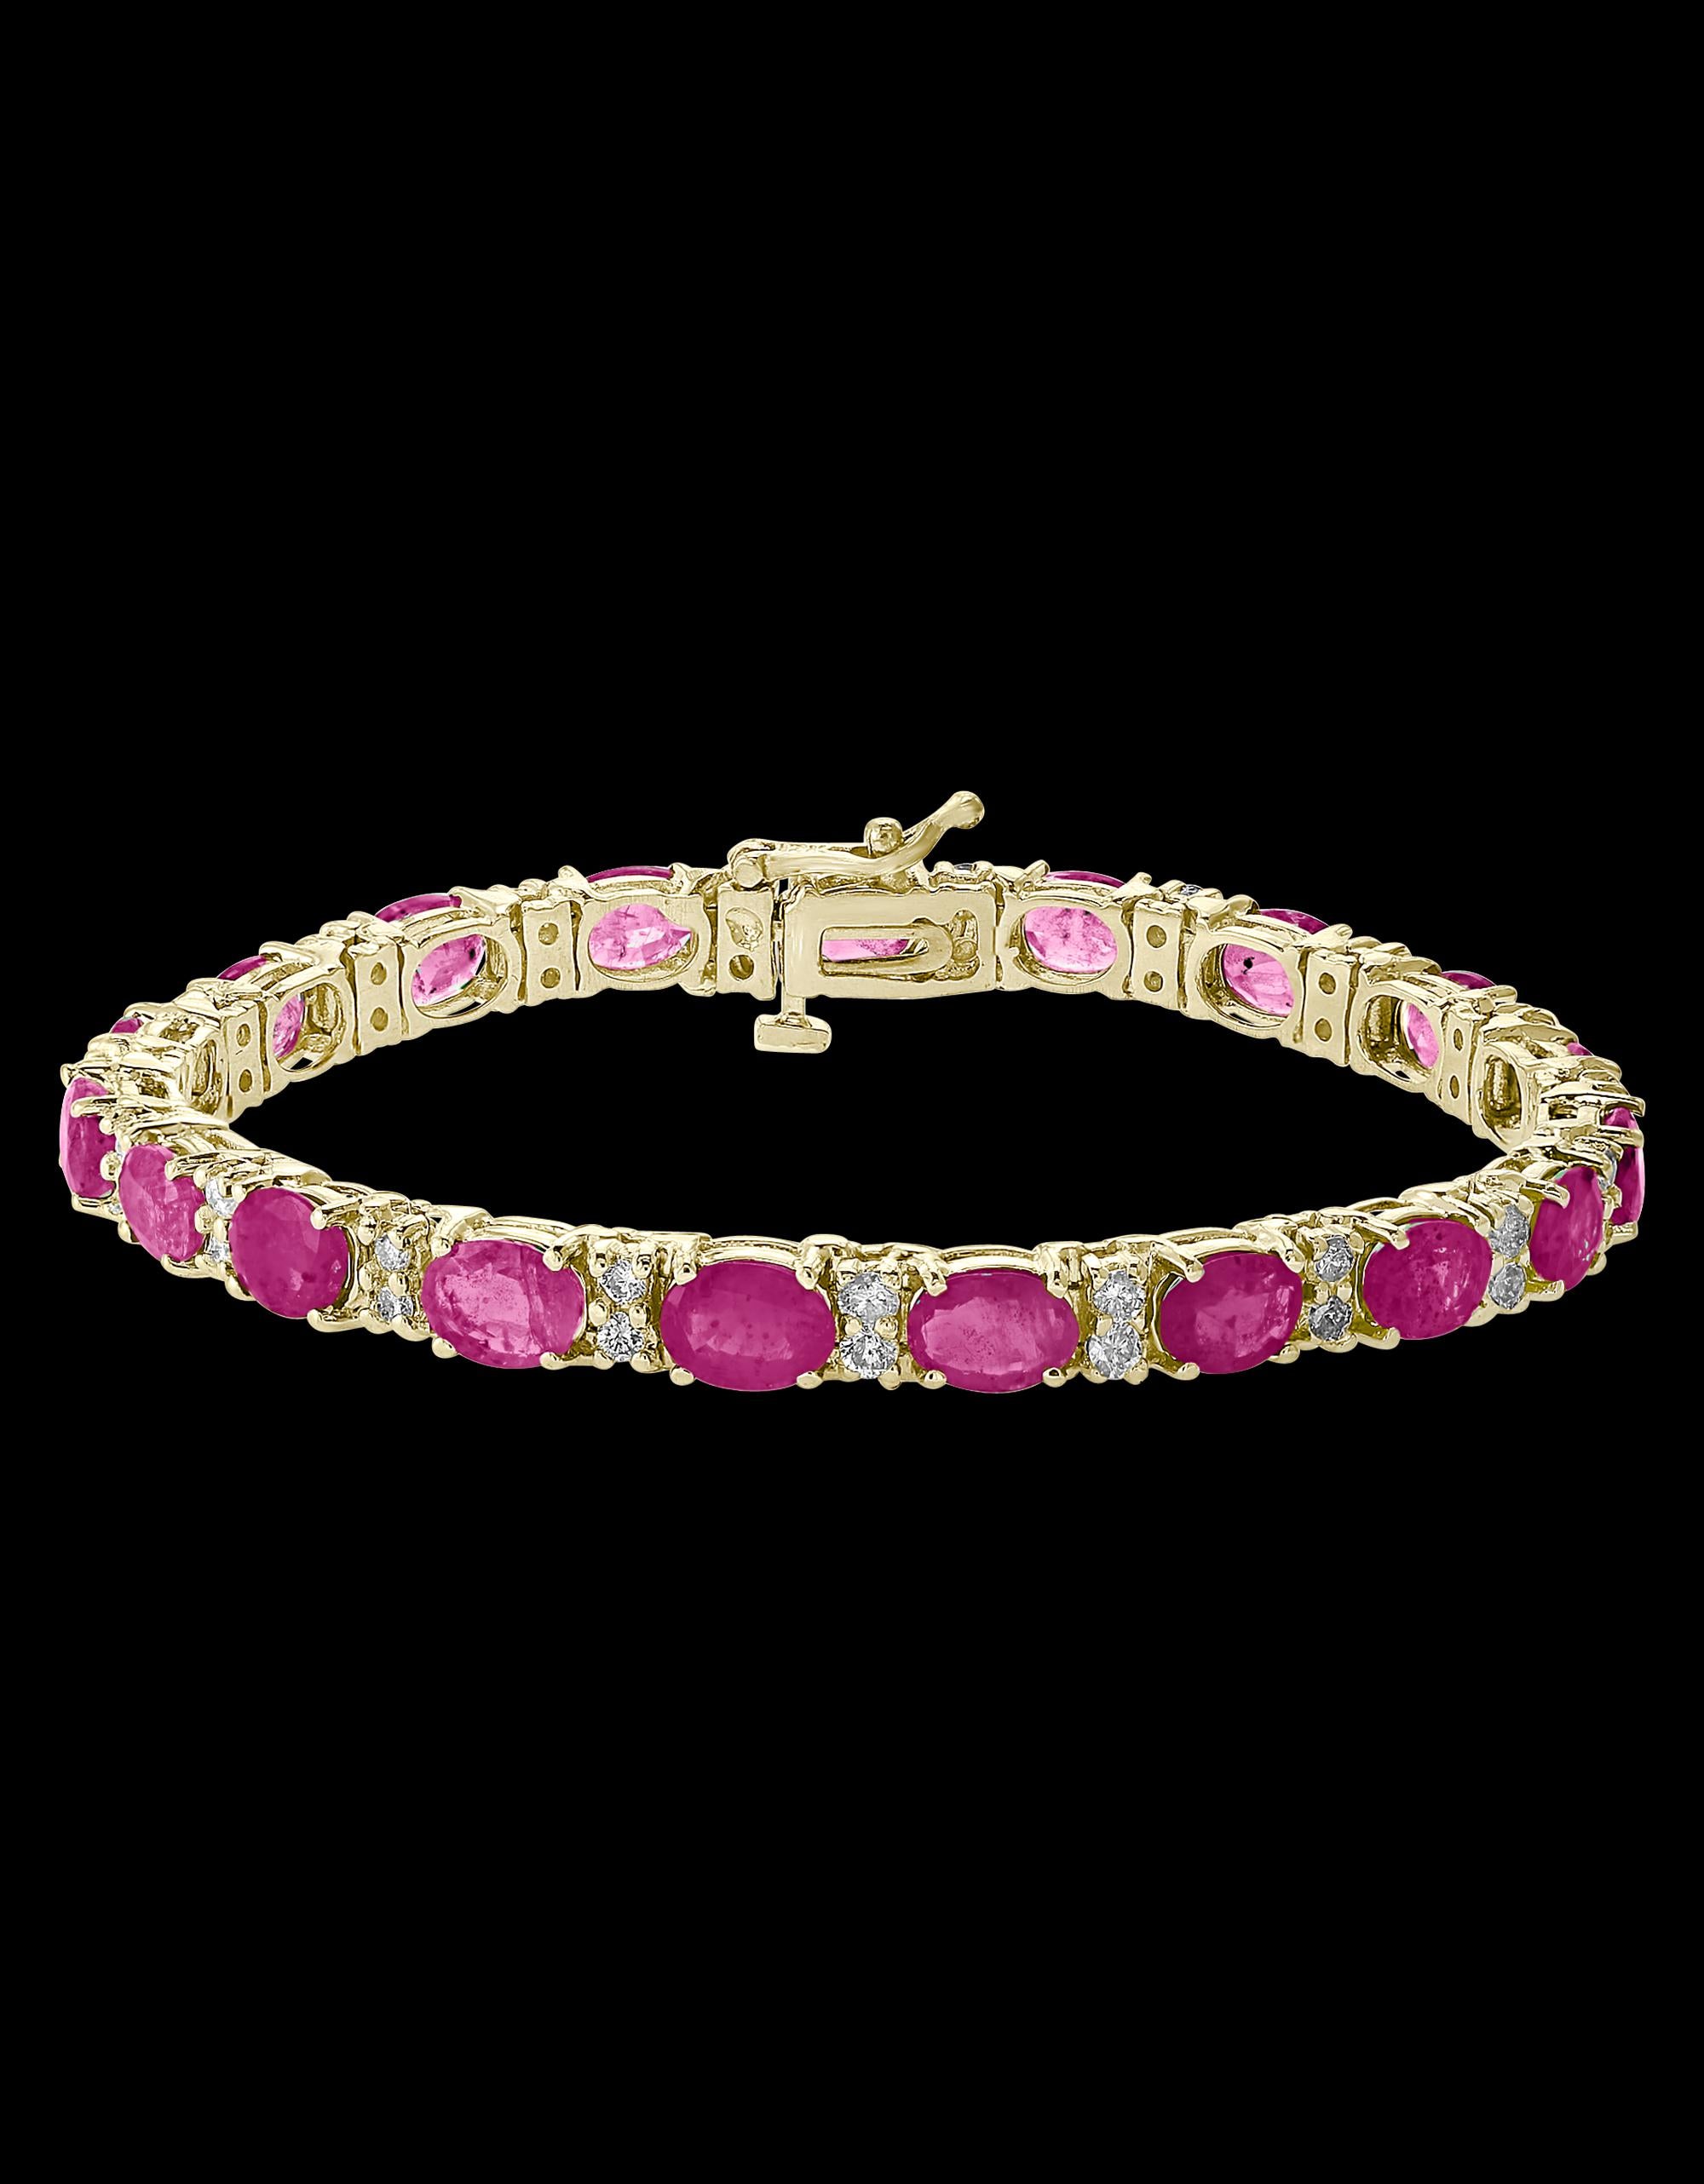  This exceptionally affordable Tennis  bracelet has  19 stones of oval  Rubies  . Each Ruby is spaced by two diamonds . The weight of the Ruby is 16 Carat .Total number of diamonds are 38 and diamond weighs 1.0 carats. Standard 7 inch long.
The